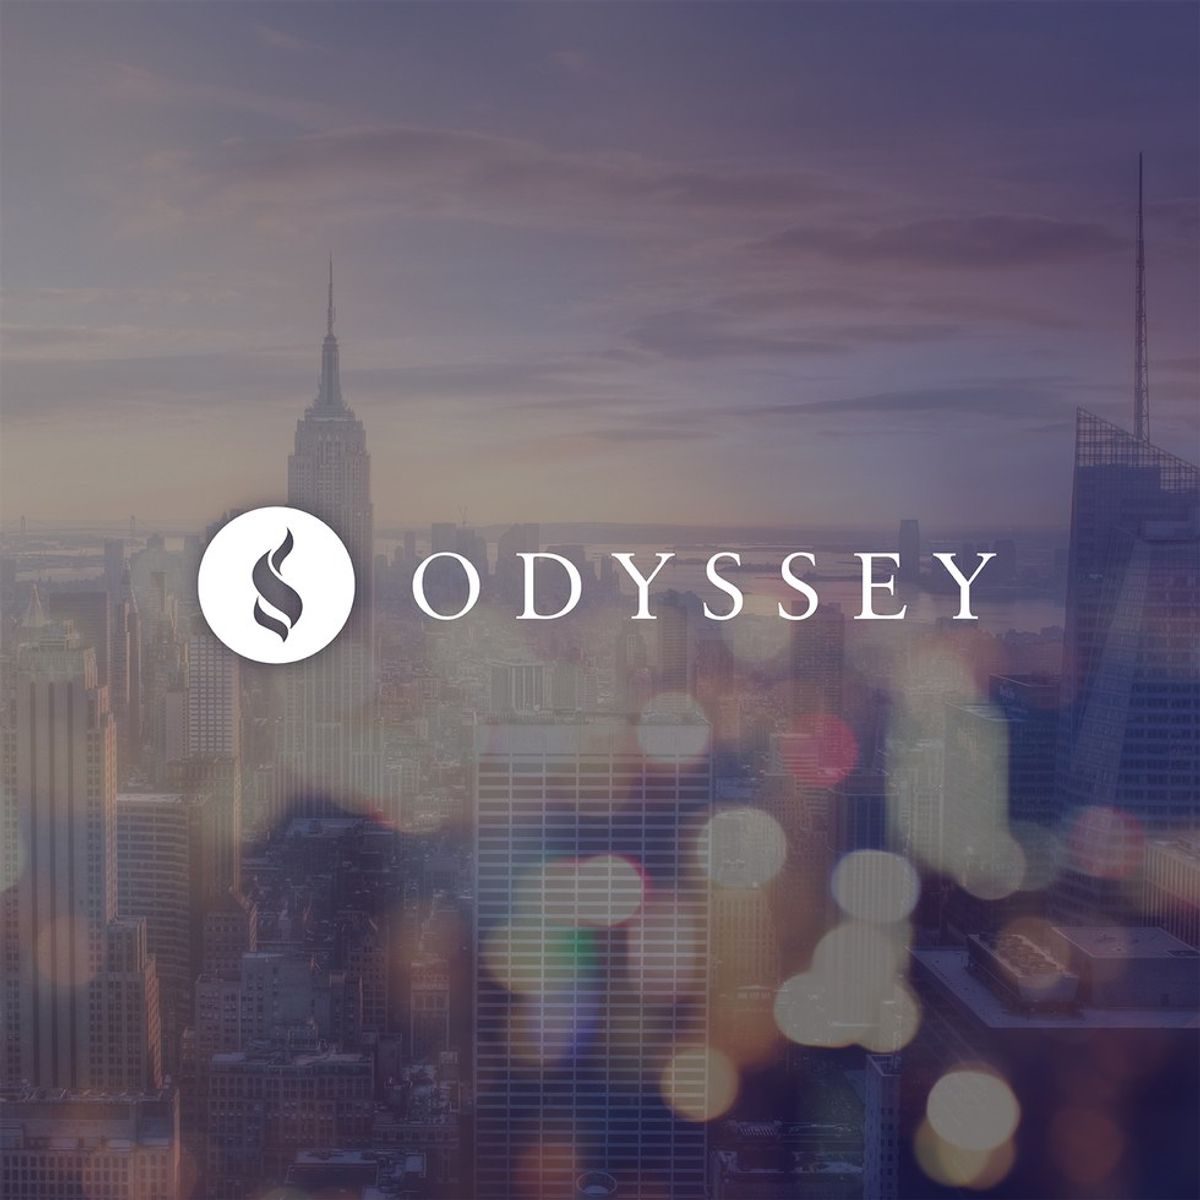 What I Learned From Visiting Odyssey Headquarters